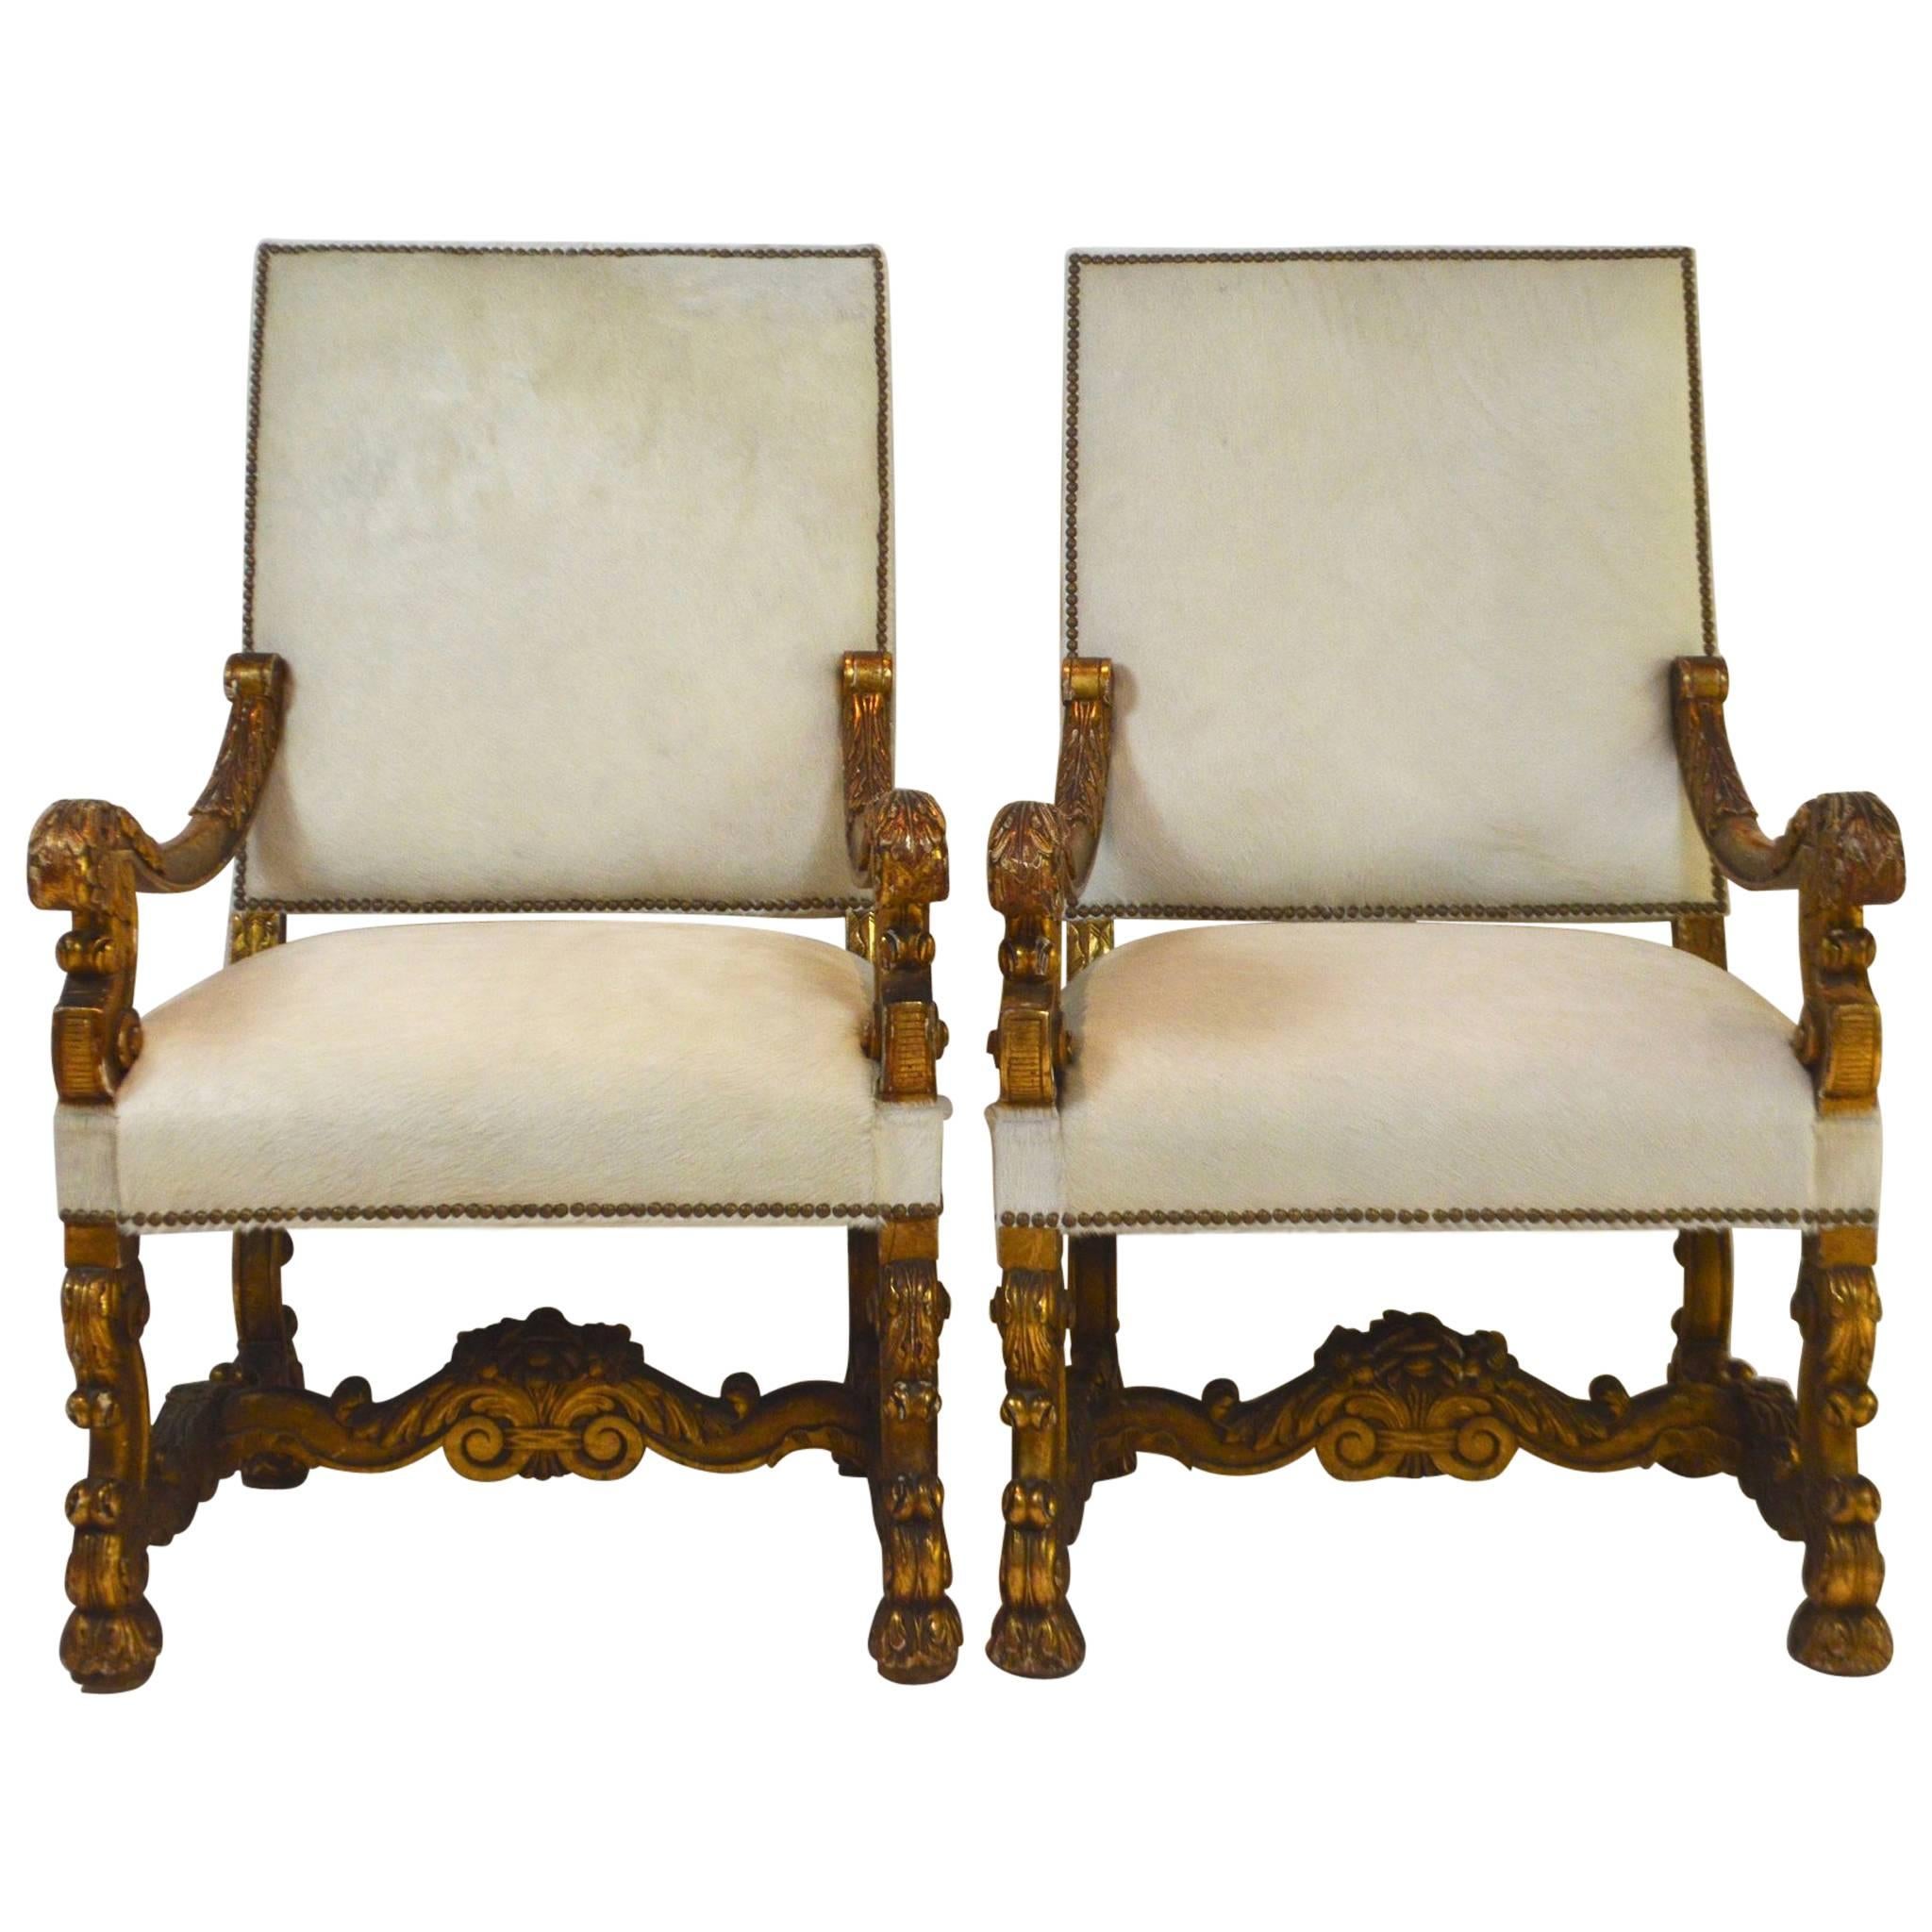 Pair of 19th Century Louis XIV Style Giltwood White Hair Hide Fauteuils